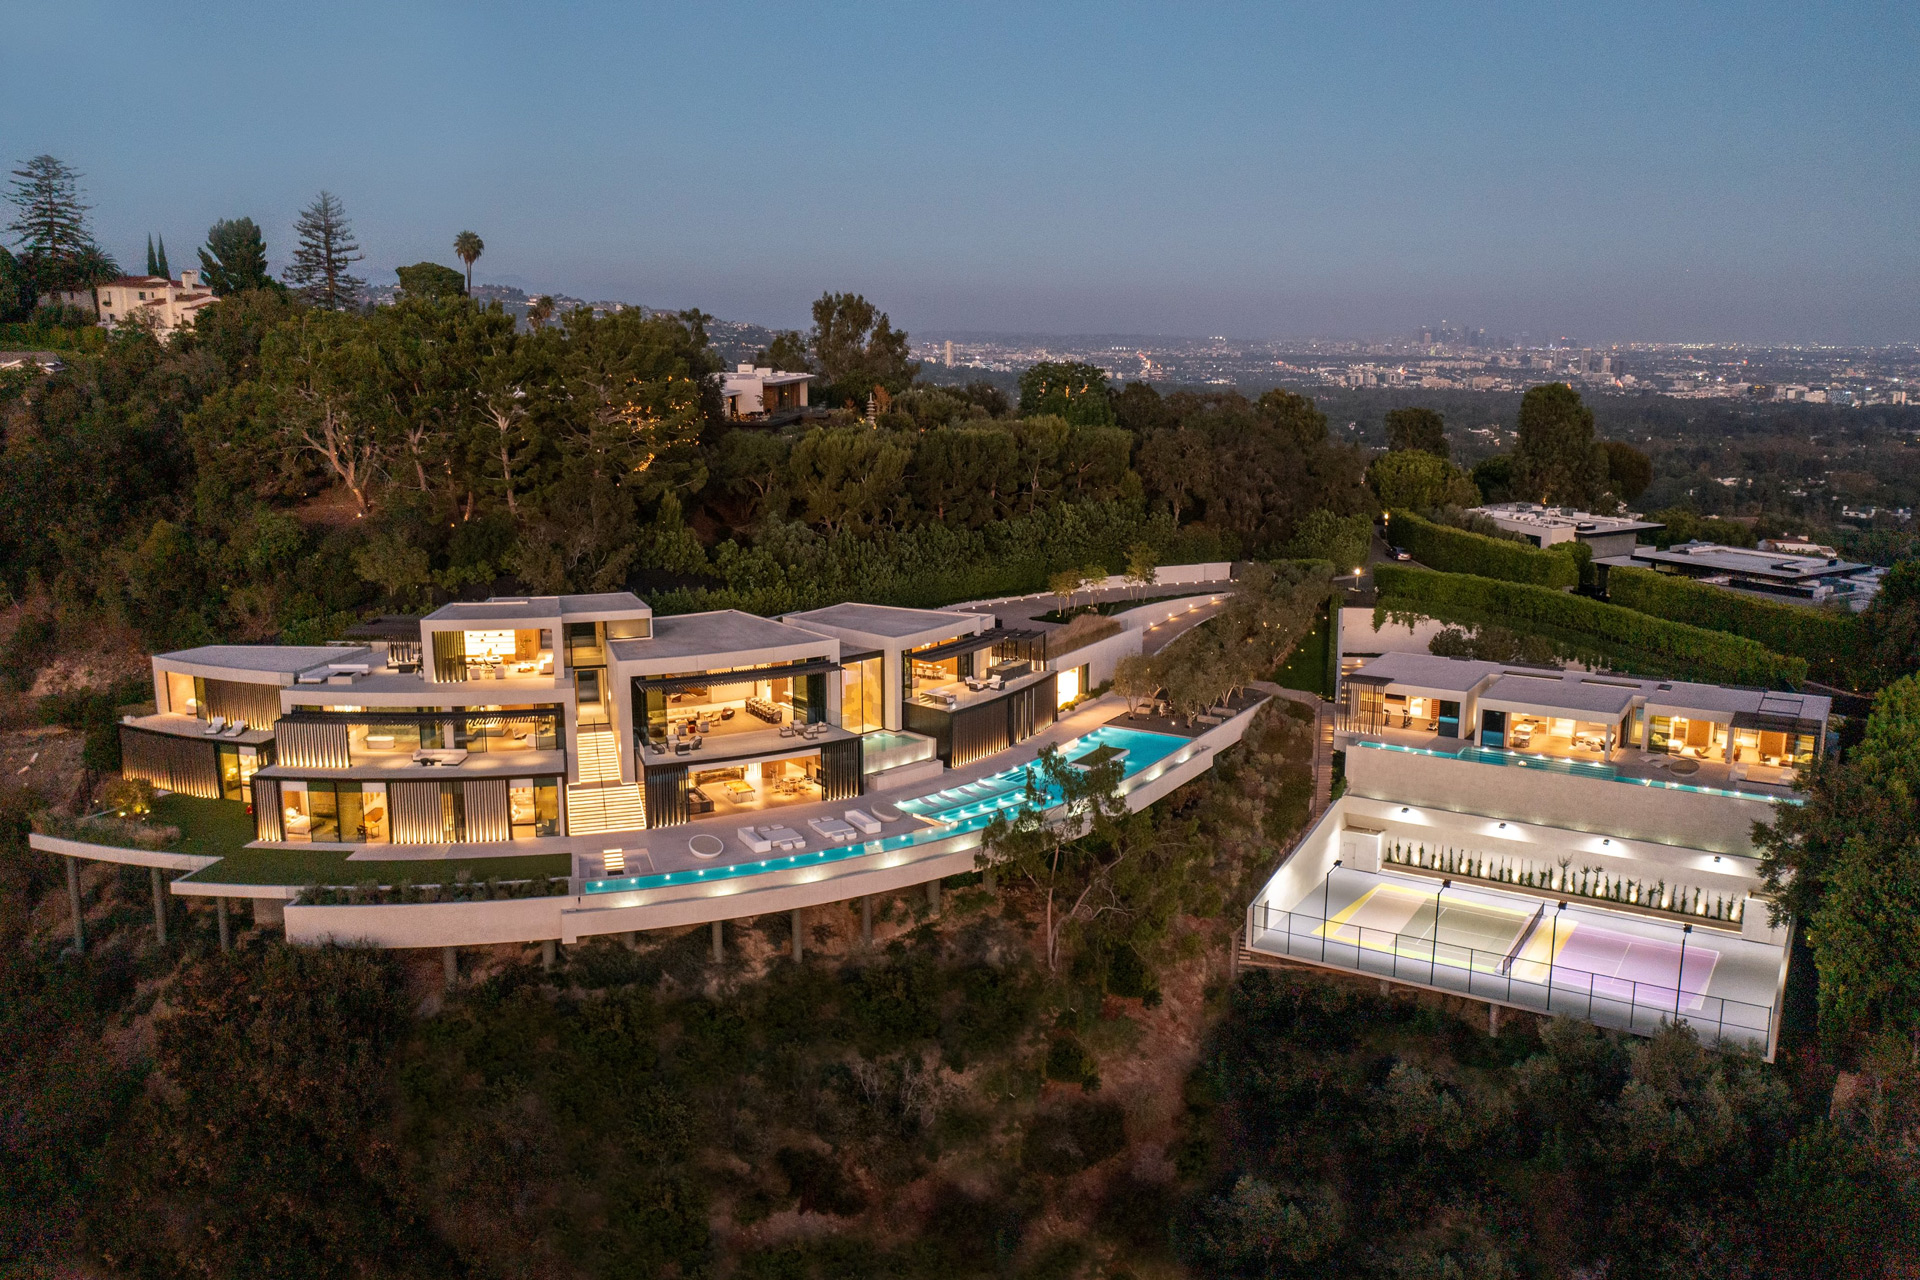 Aerial view of Bel Air mansion on a hillside at dusk